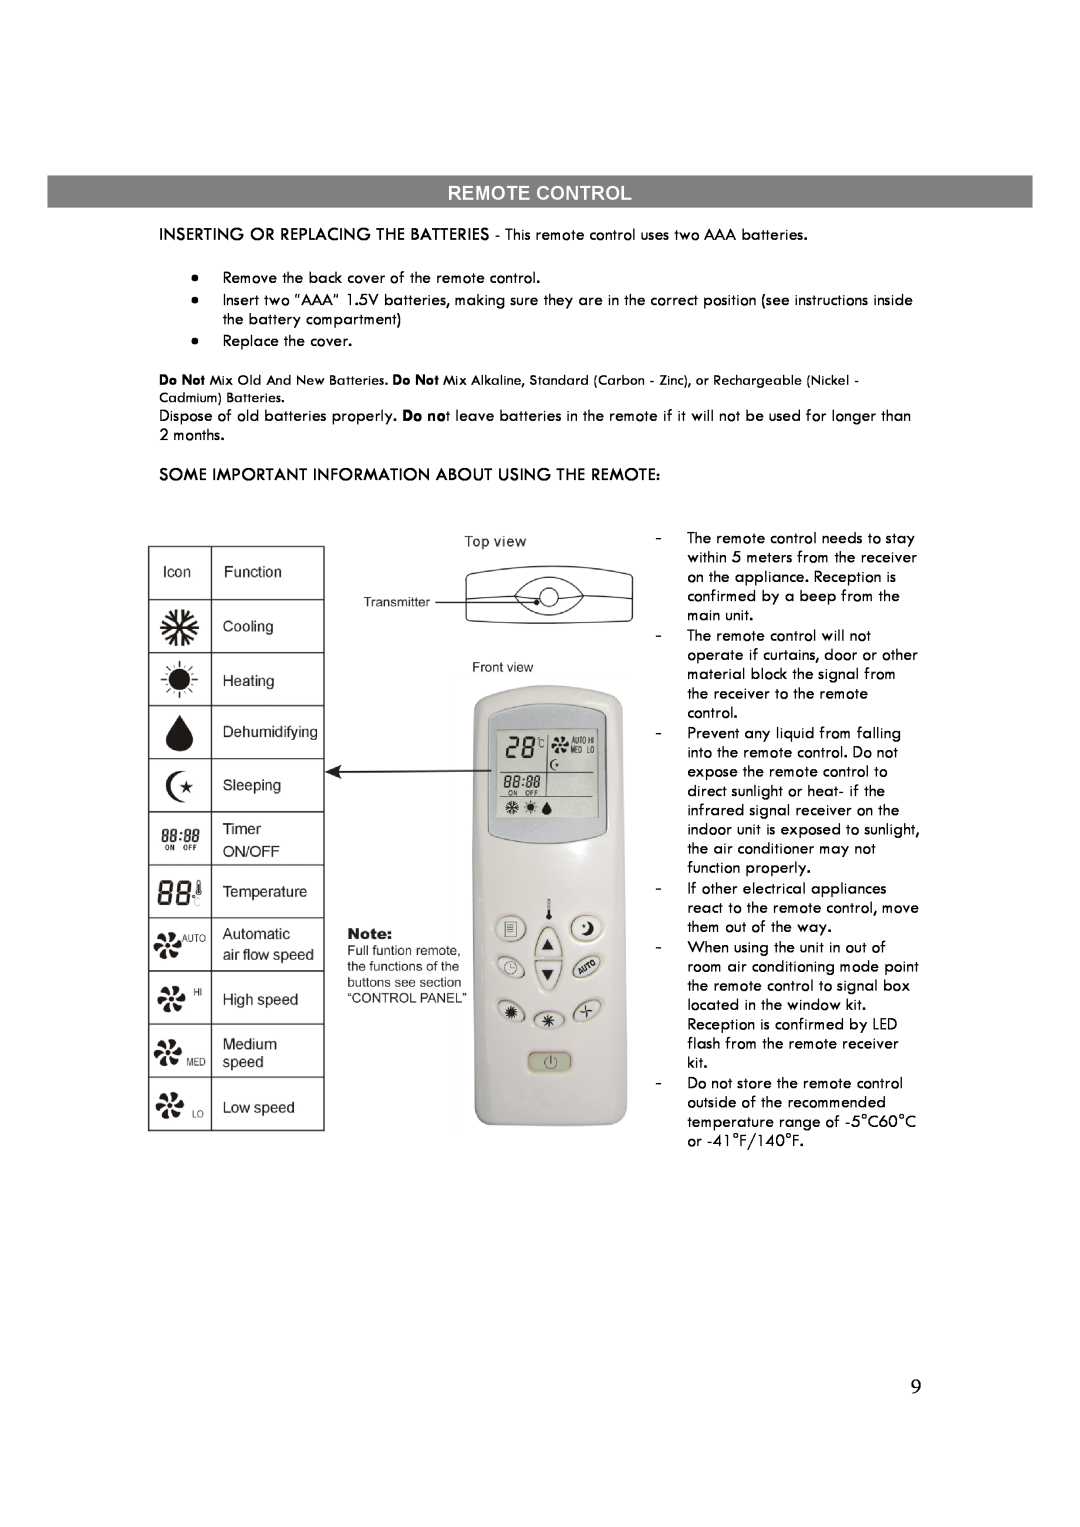 Kenmore 35132 manual Remote Control, Some Important Information About Using The Remote 